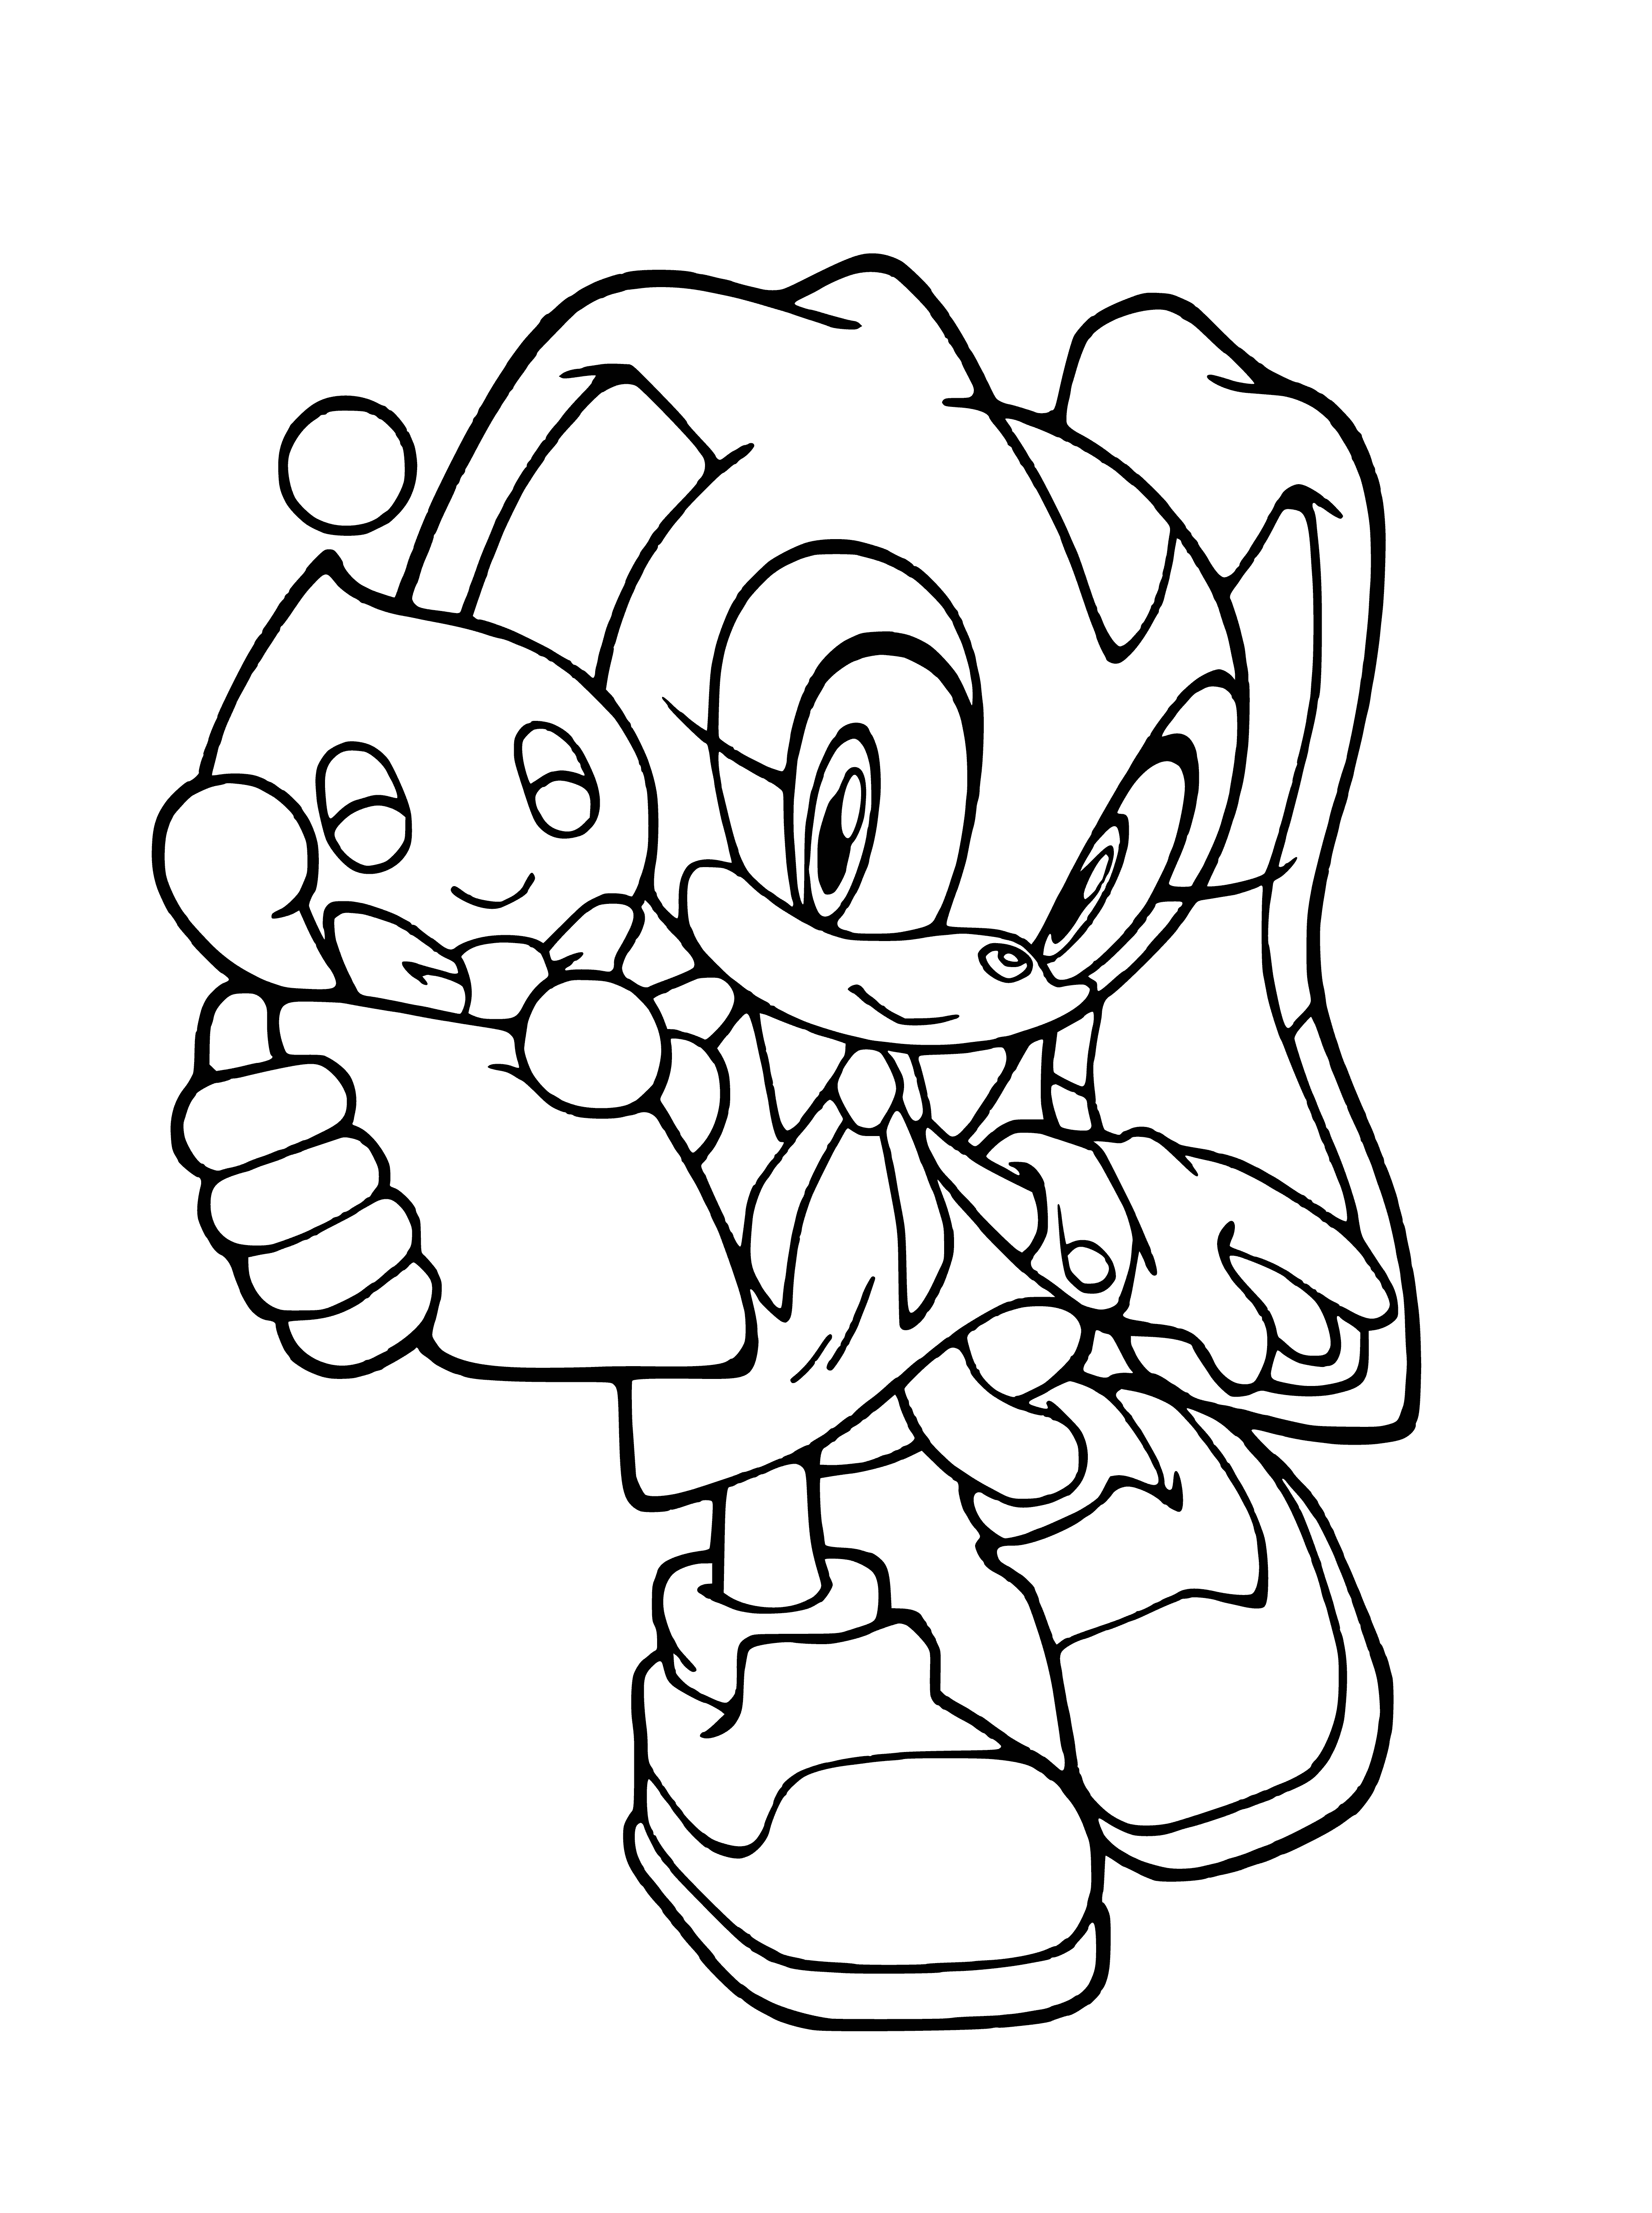 coloring page: Sonic and co. explore the breathtaking mountains & peaceful ocean of the Crimea w/ its lush trees & shining sun. They're having a great time!